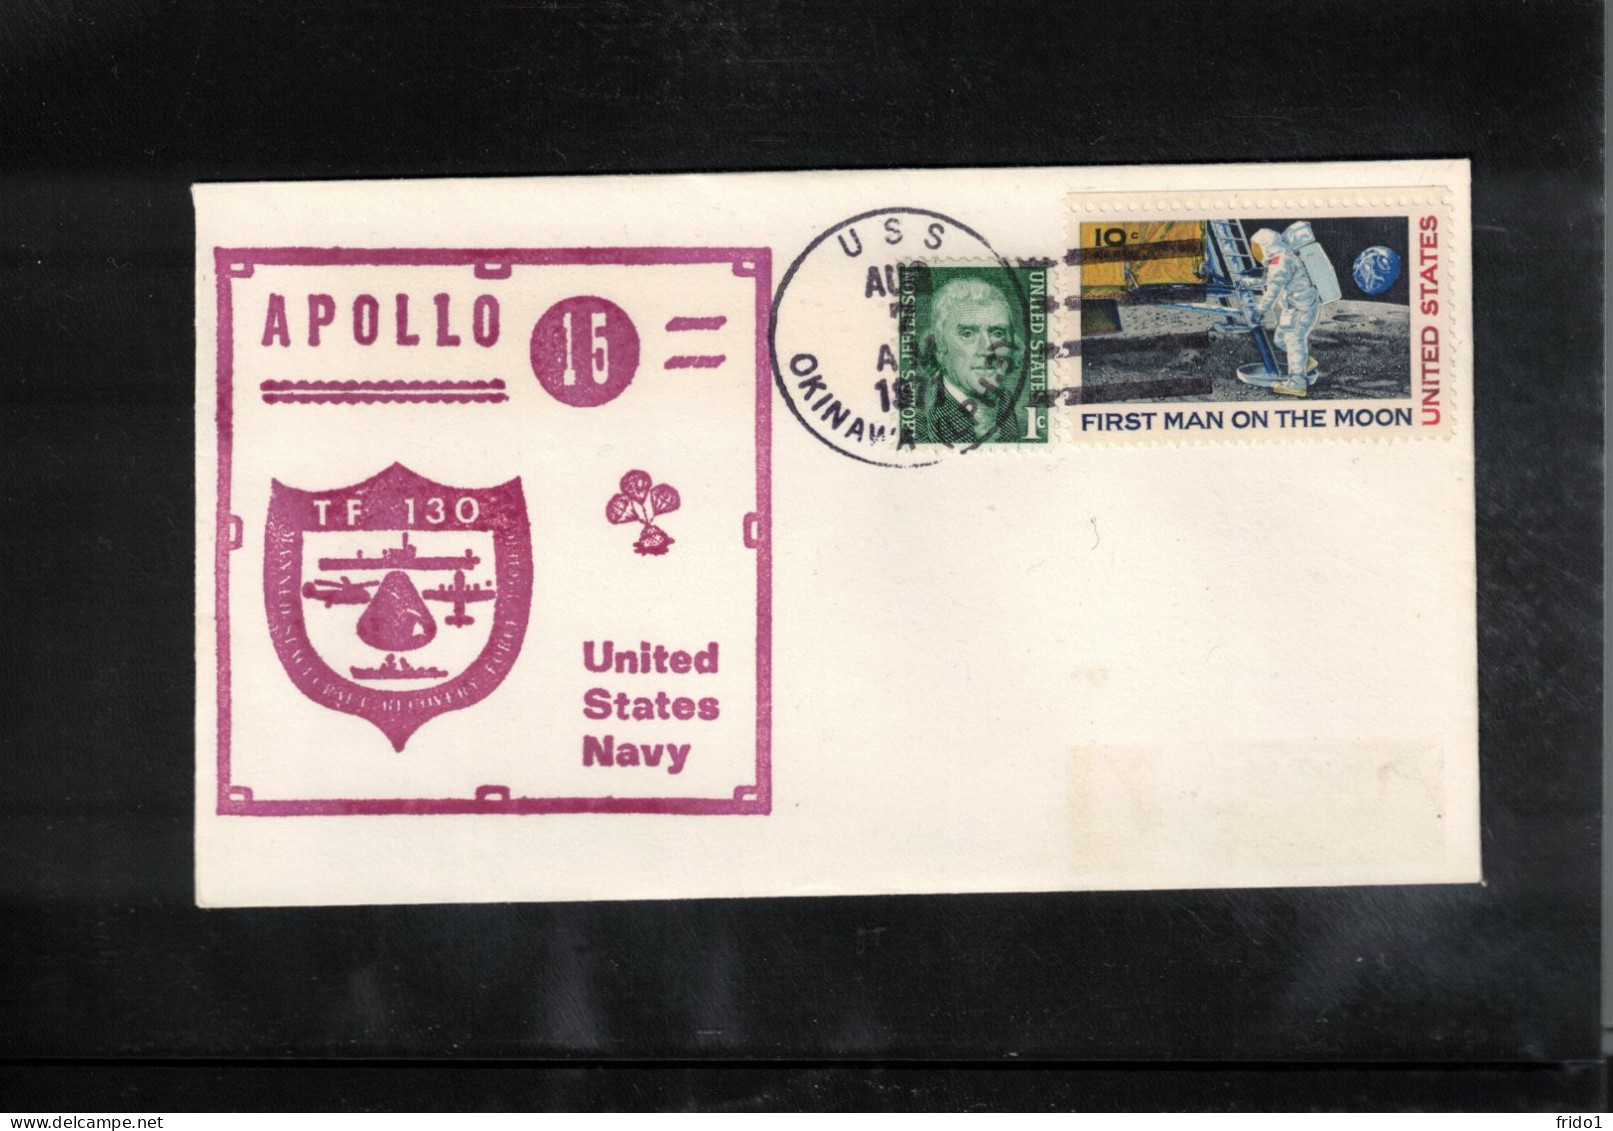 USA 1971 Space / Weltraum - Apollo 15 US Navy Recovery Force TF 130 - USS OKINAWA Interesting Cover - Verenigde Staten